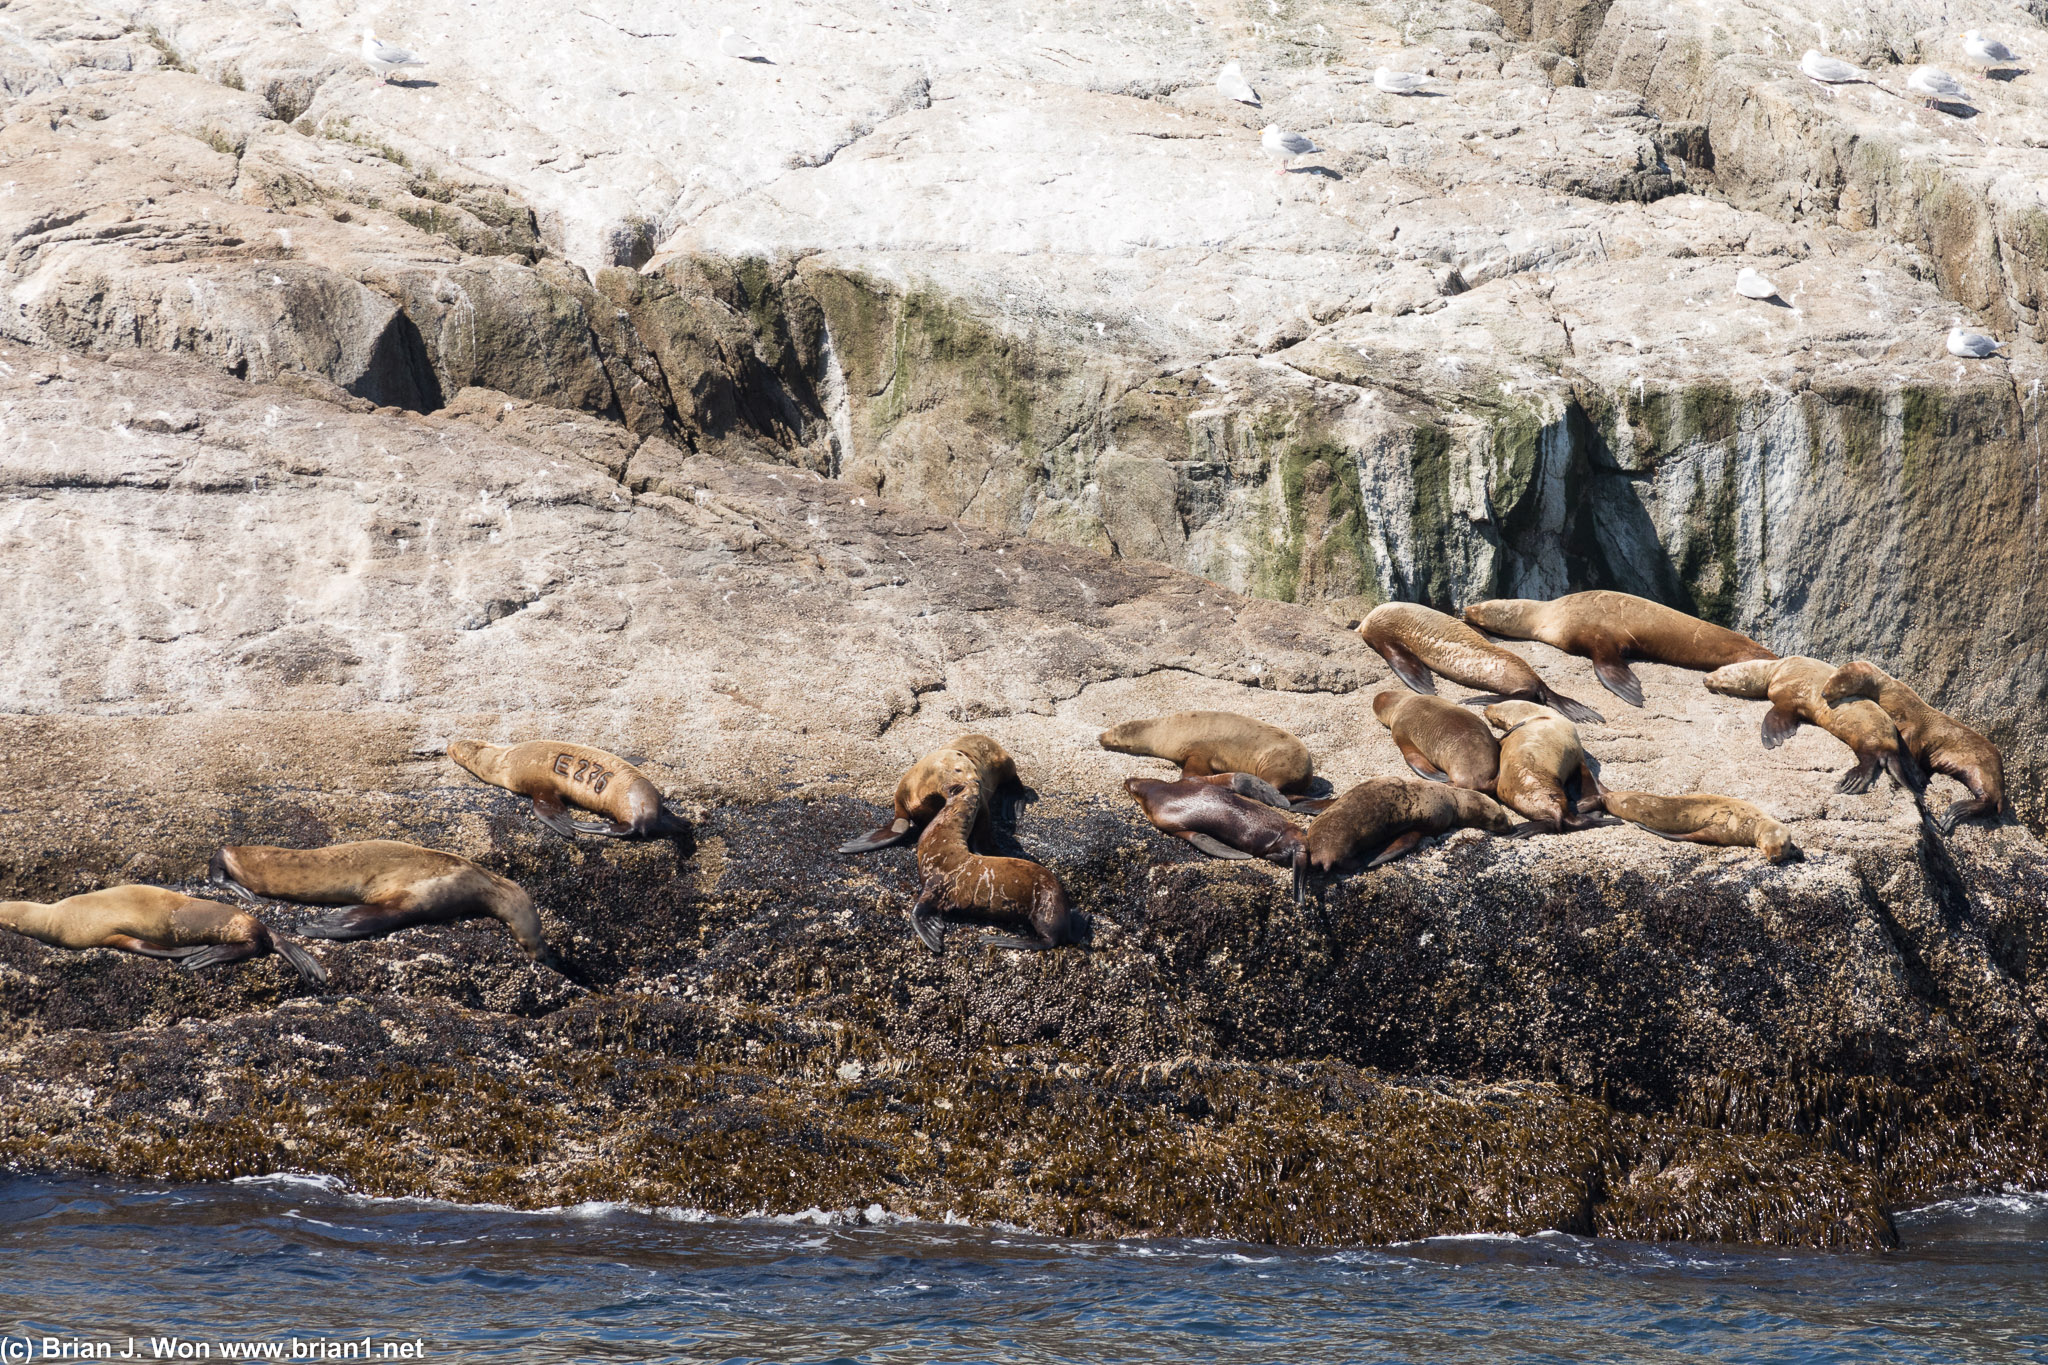 That is a lot of sea lions.